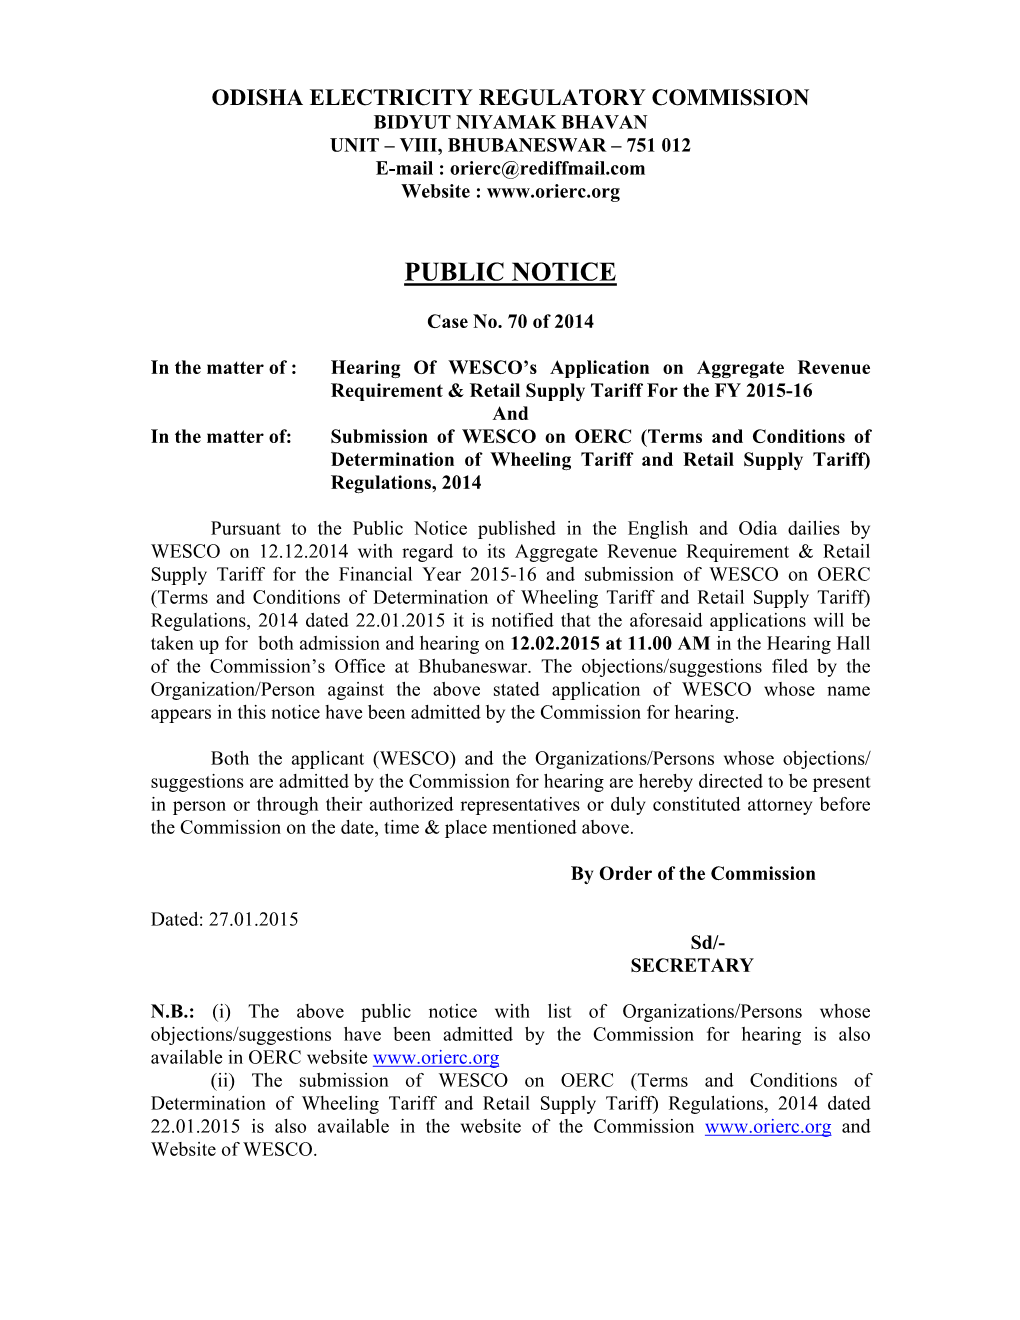 Public Notice for Hearing